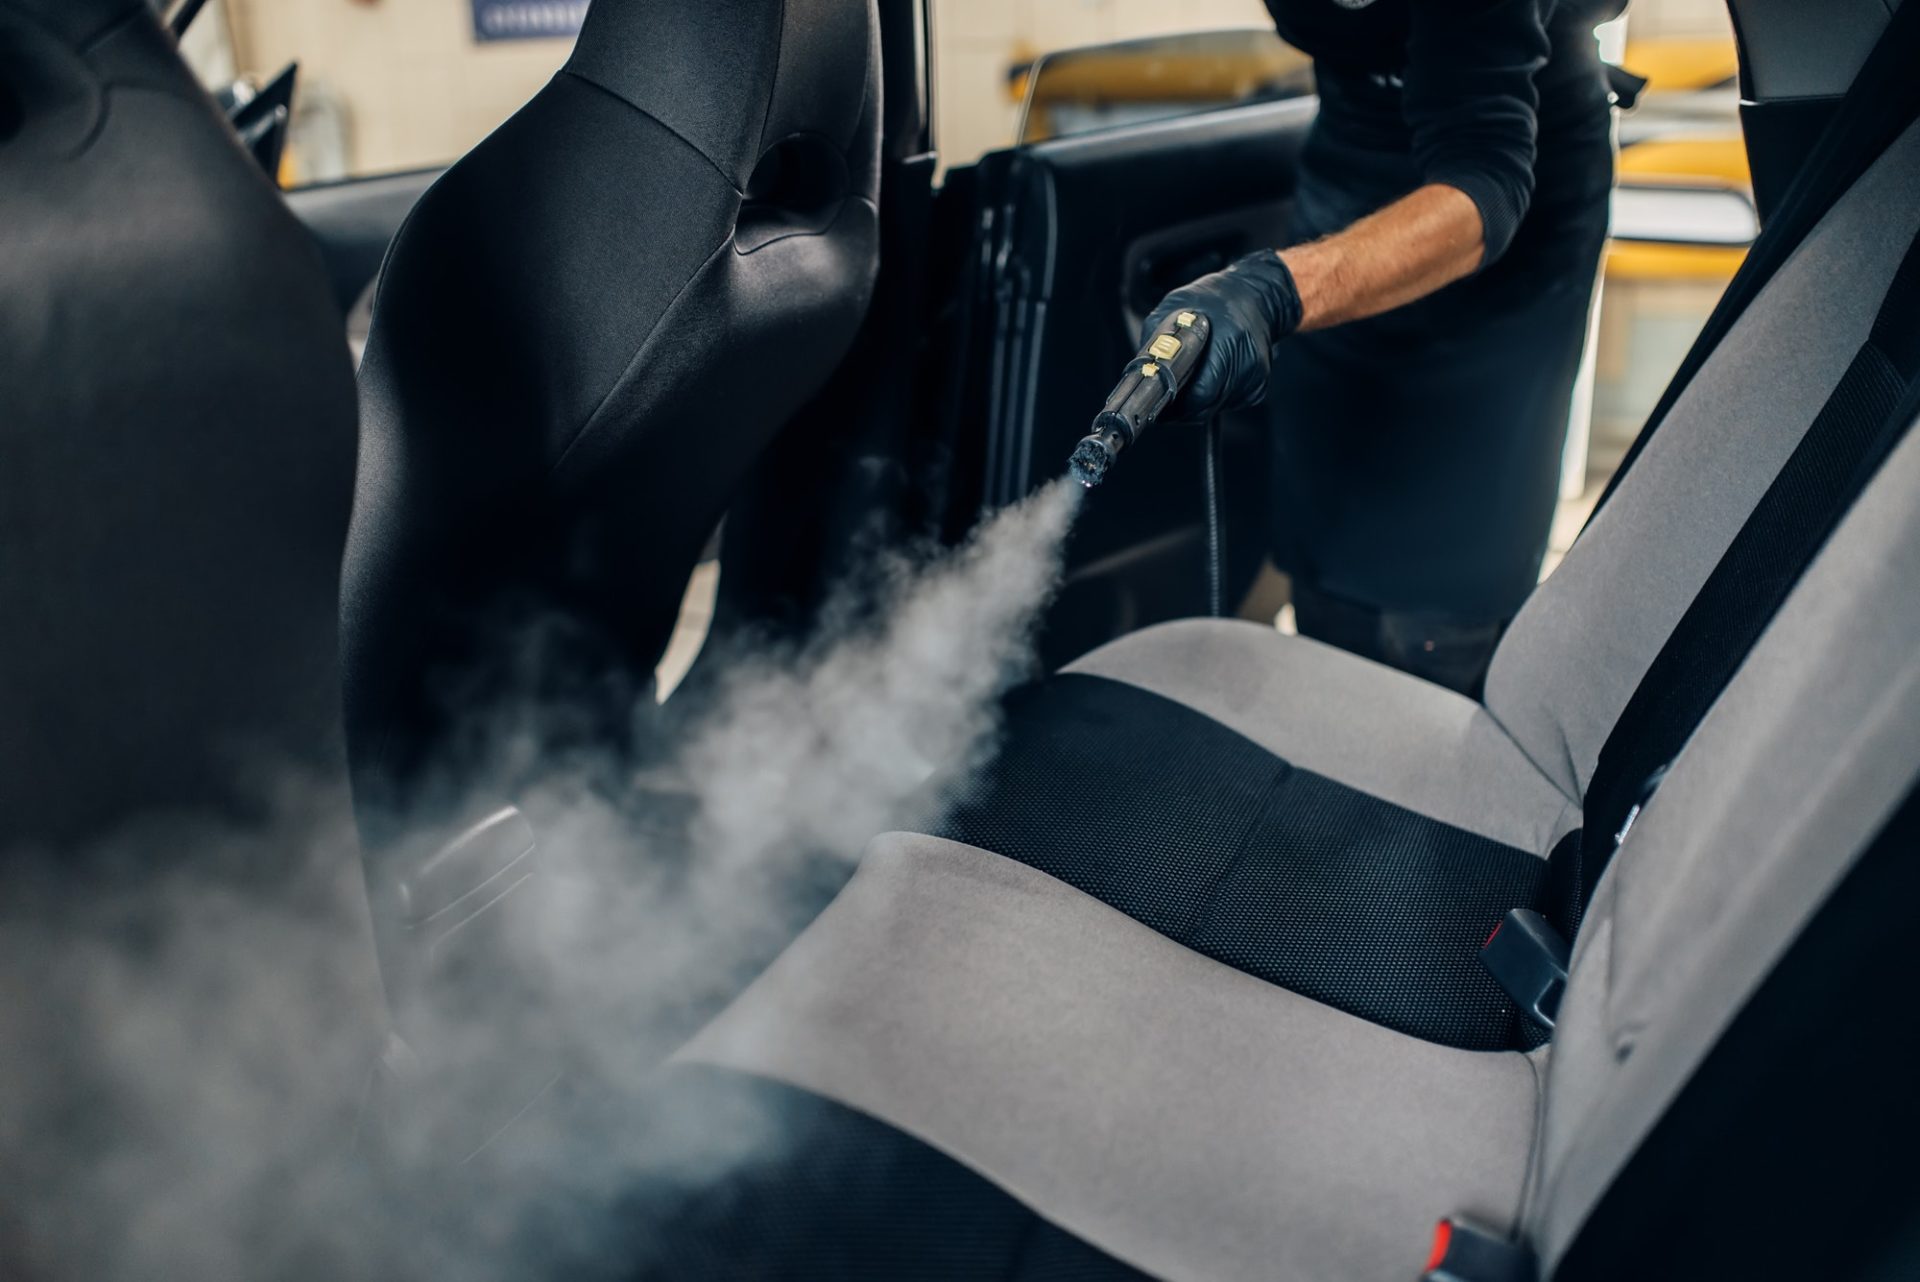 Carwash, worker cleans seats with steam cleaner